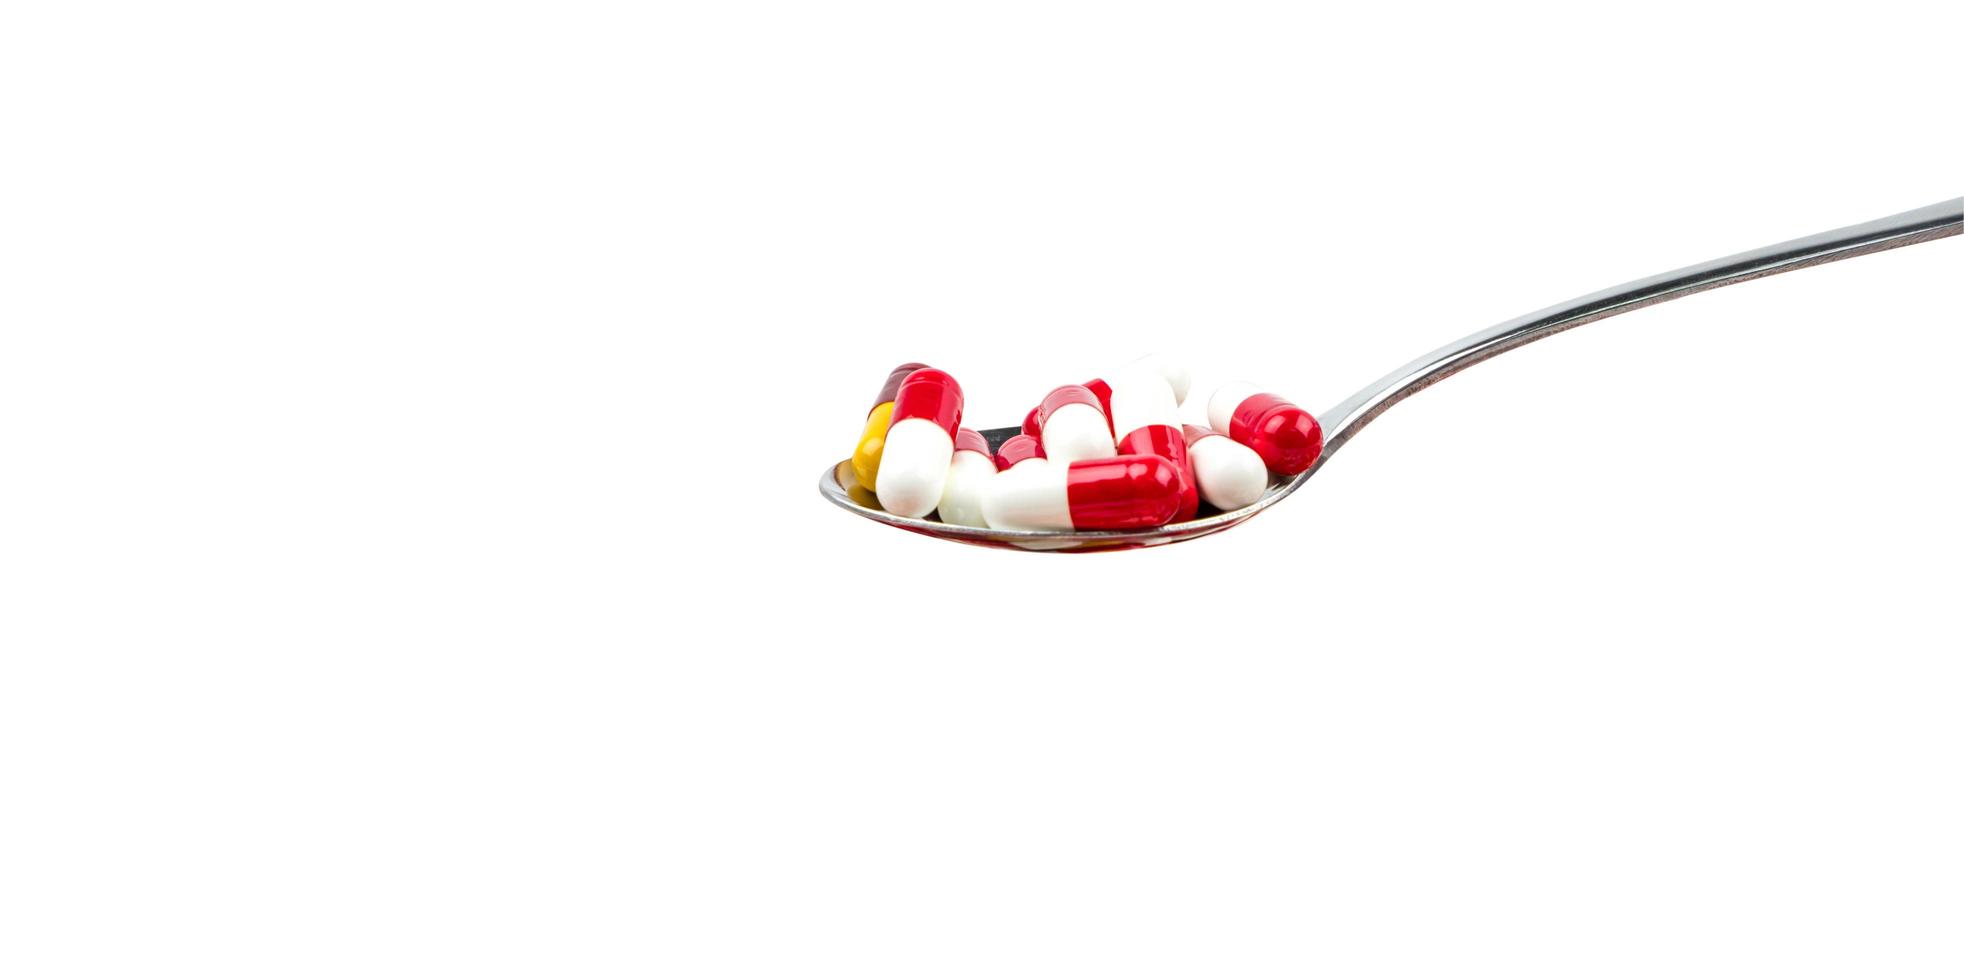 Antibiotic capsule pills in stainless steel spoon isolated on background with copy space. Drug resistance concept. Antibiotics drug use with reasonable and global healthcare concept. photo